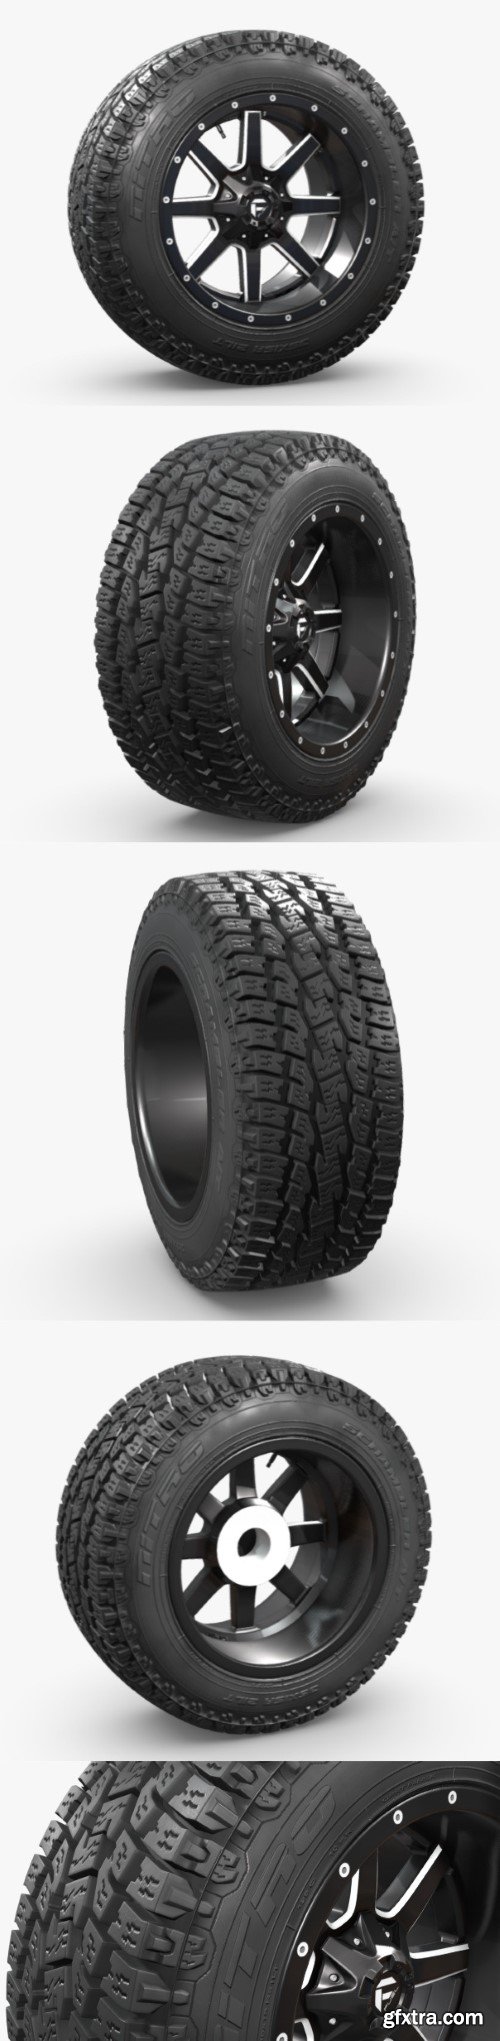 OFF ROAD WHEEL AND TIRE 3D Model